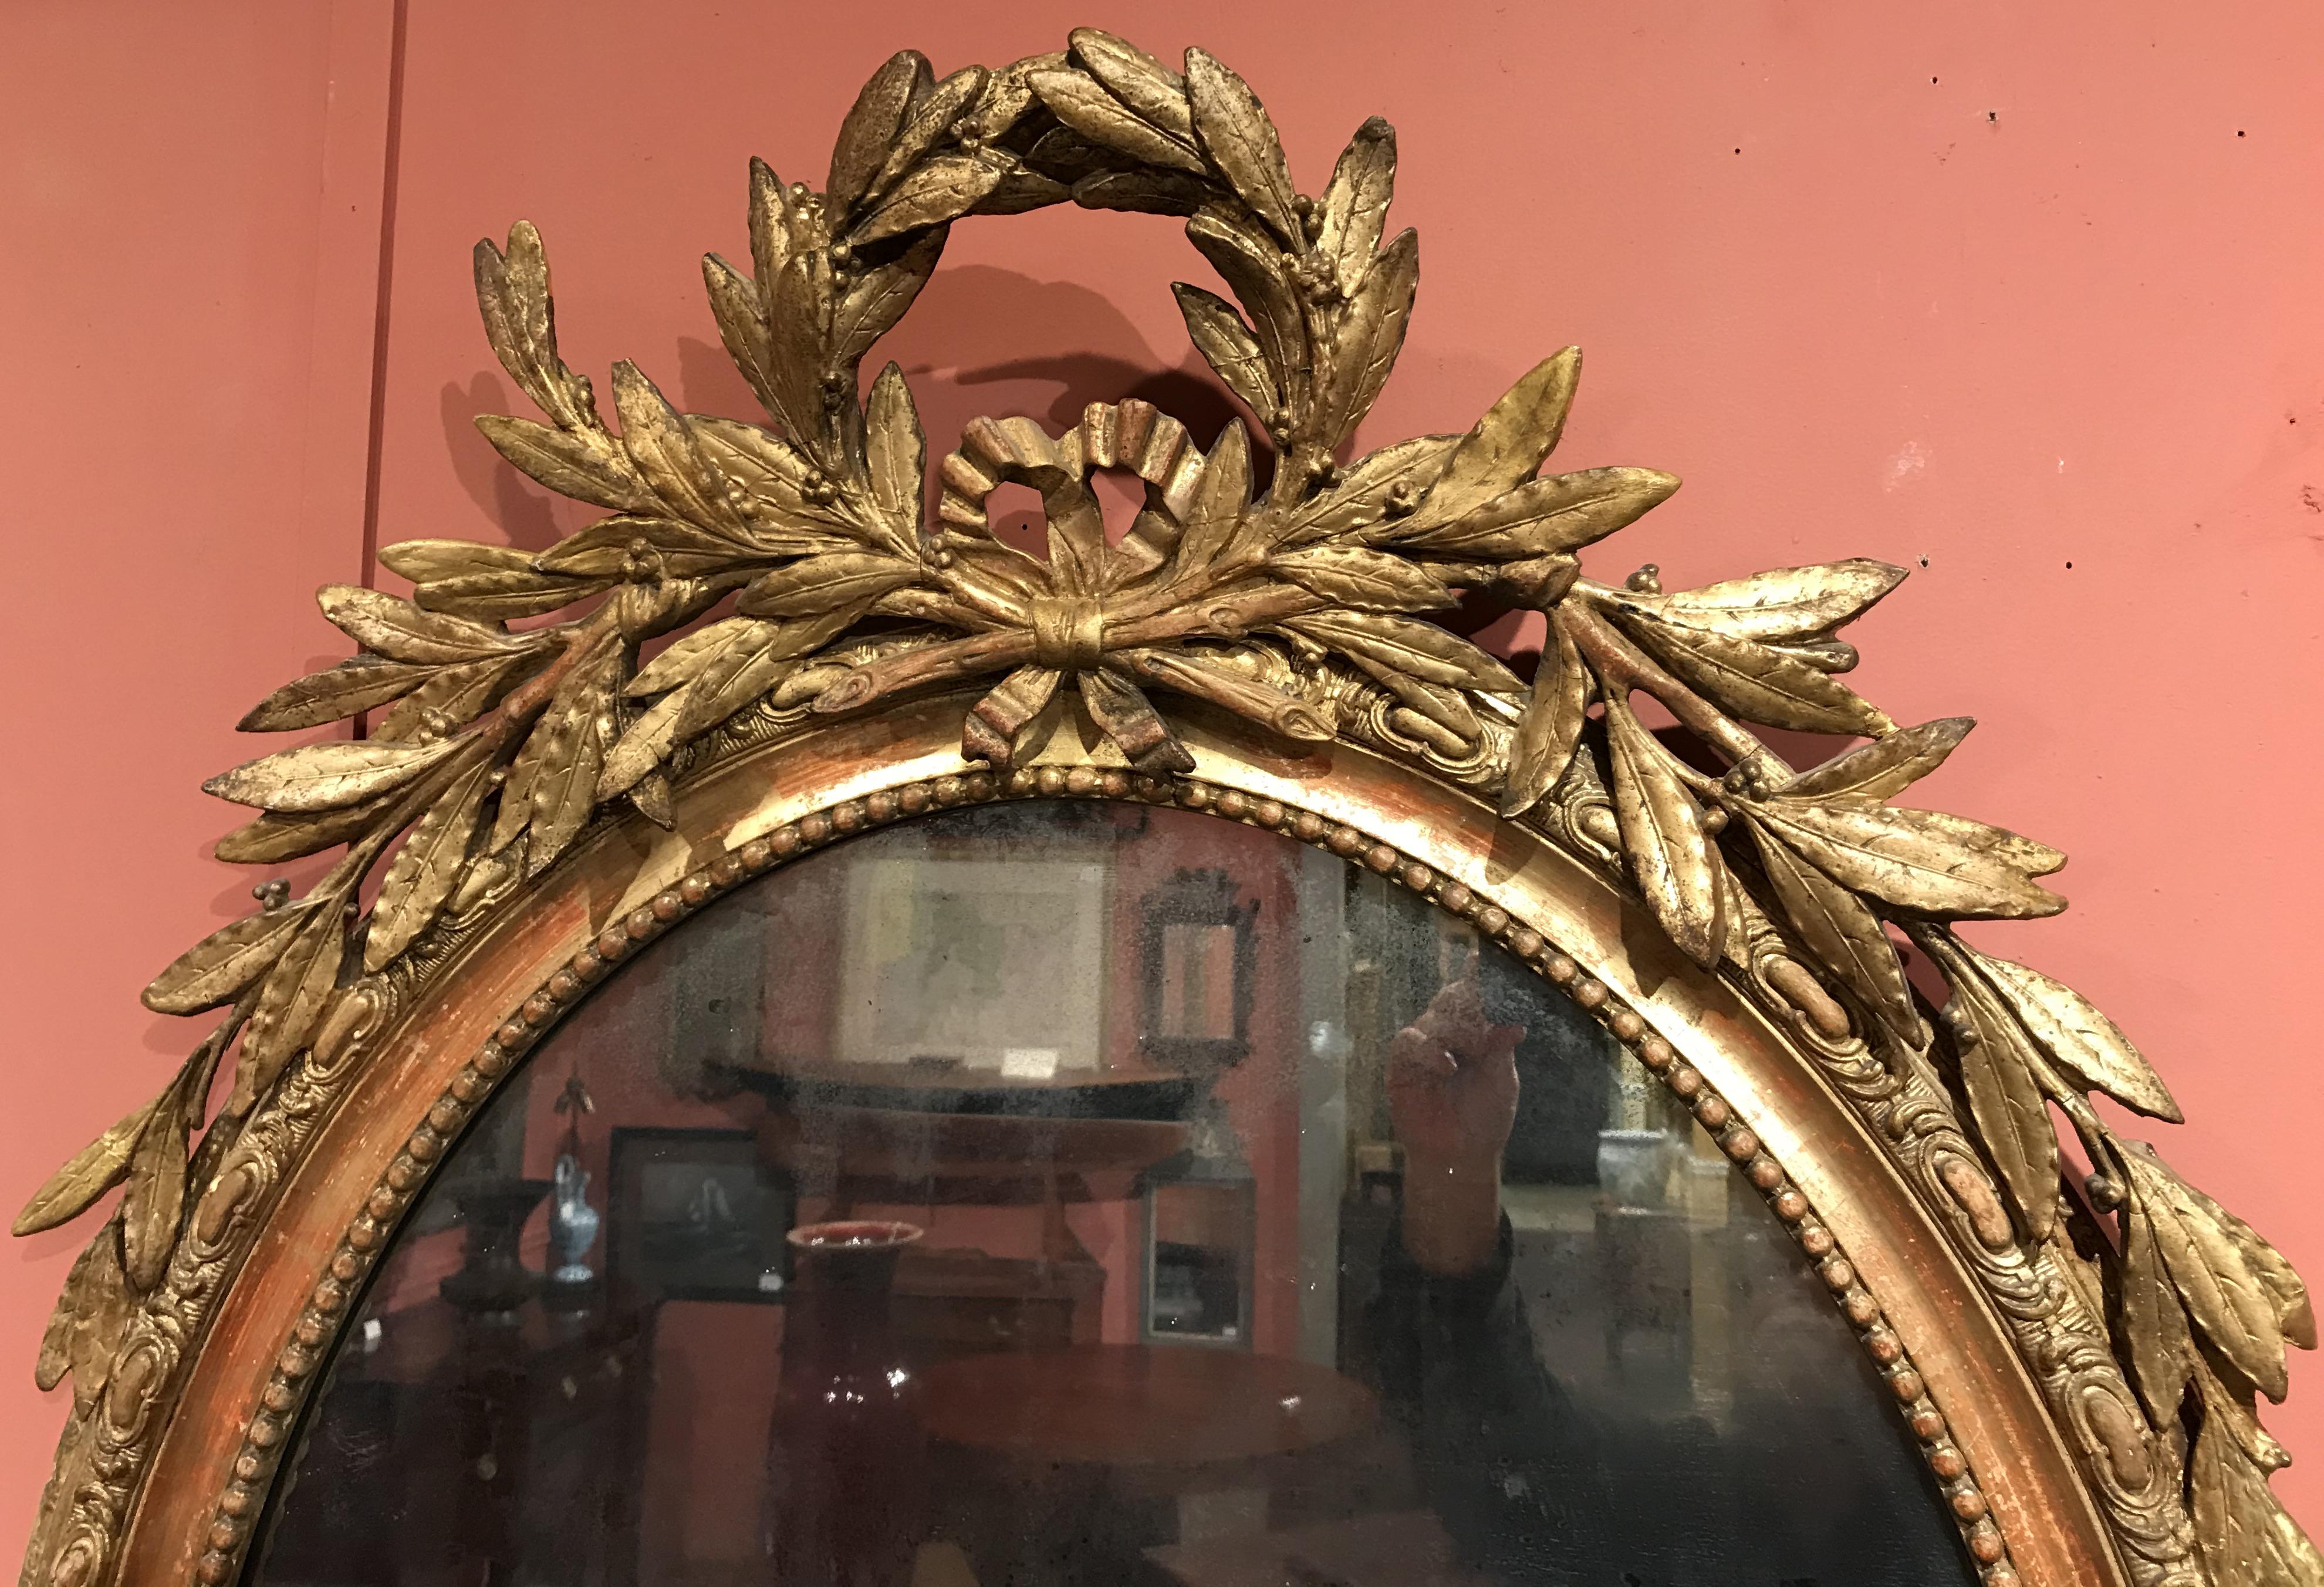 A fine French gilt oval mirror with carved wooden foliate laurel decoration from the early 19th century, in very good overall condition, minor old repairs and losses, back panel stains, and other imperfections. Dimensions: 47 in H x 31 in W x 6 in D.